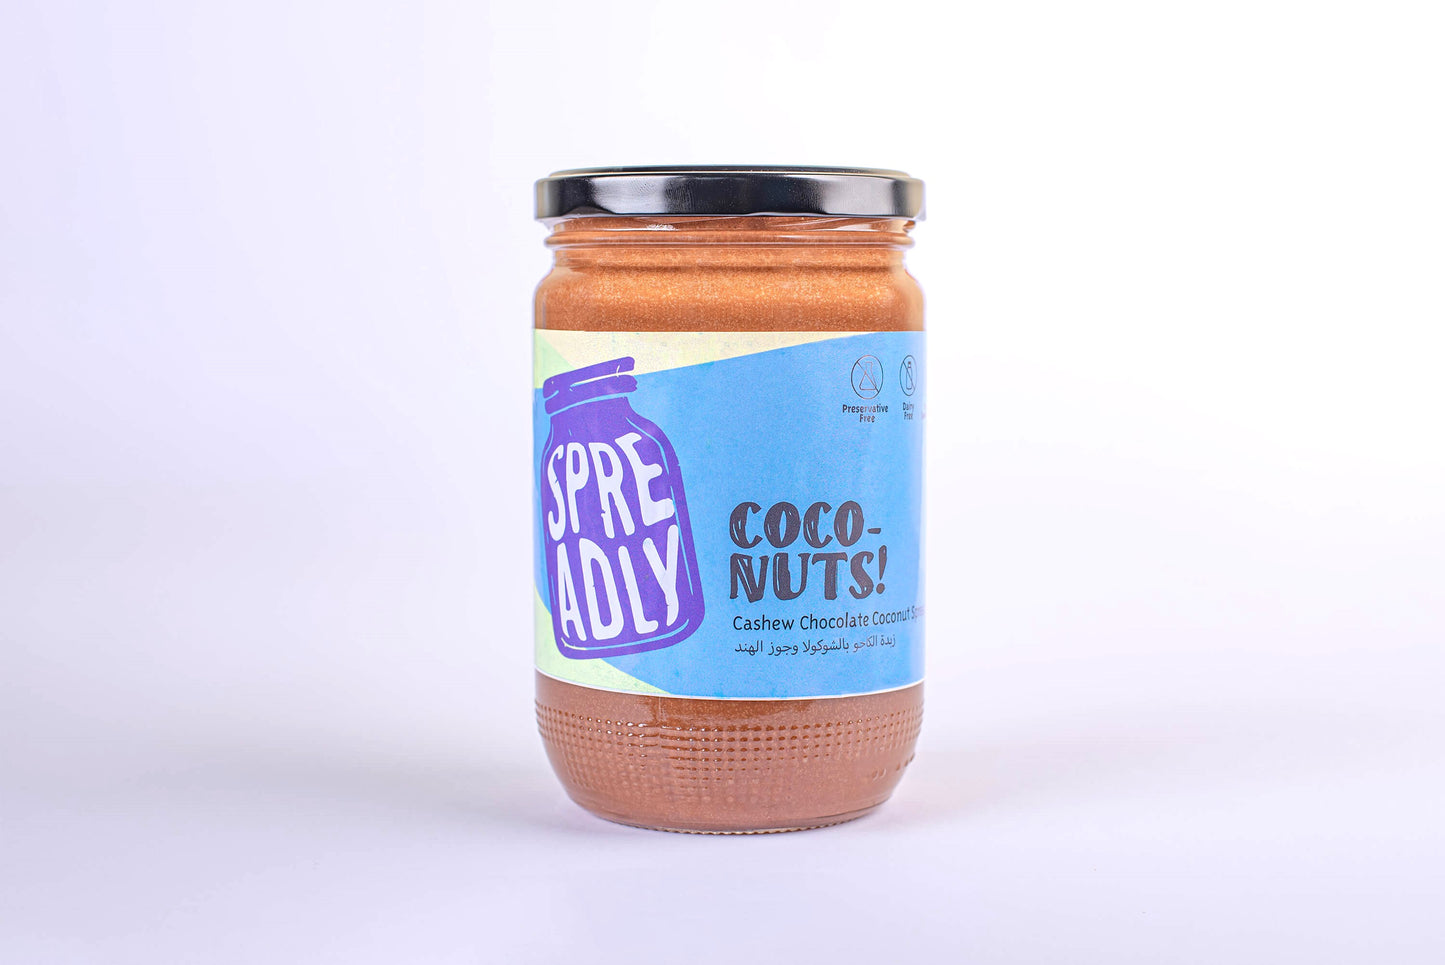 Healthy Chocolate Spread Rich in ry Roasted Cashews, with dairy free dark chocolate and coconut shreds ! FREE OF PRESERVATIVES, OIL AND DAIRY.